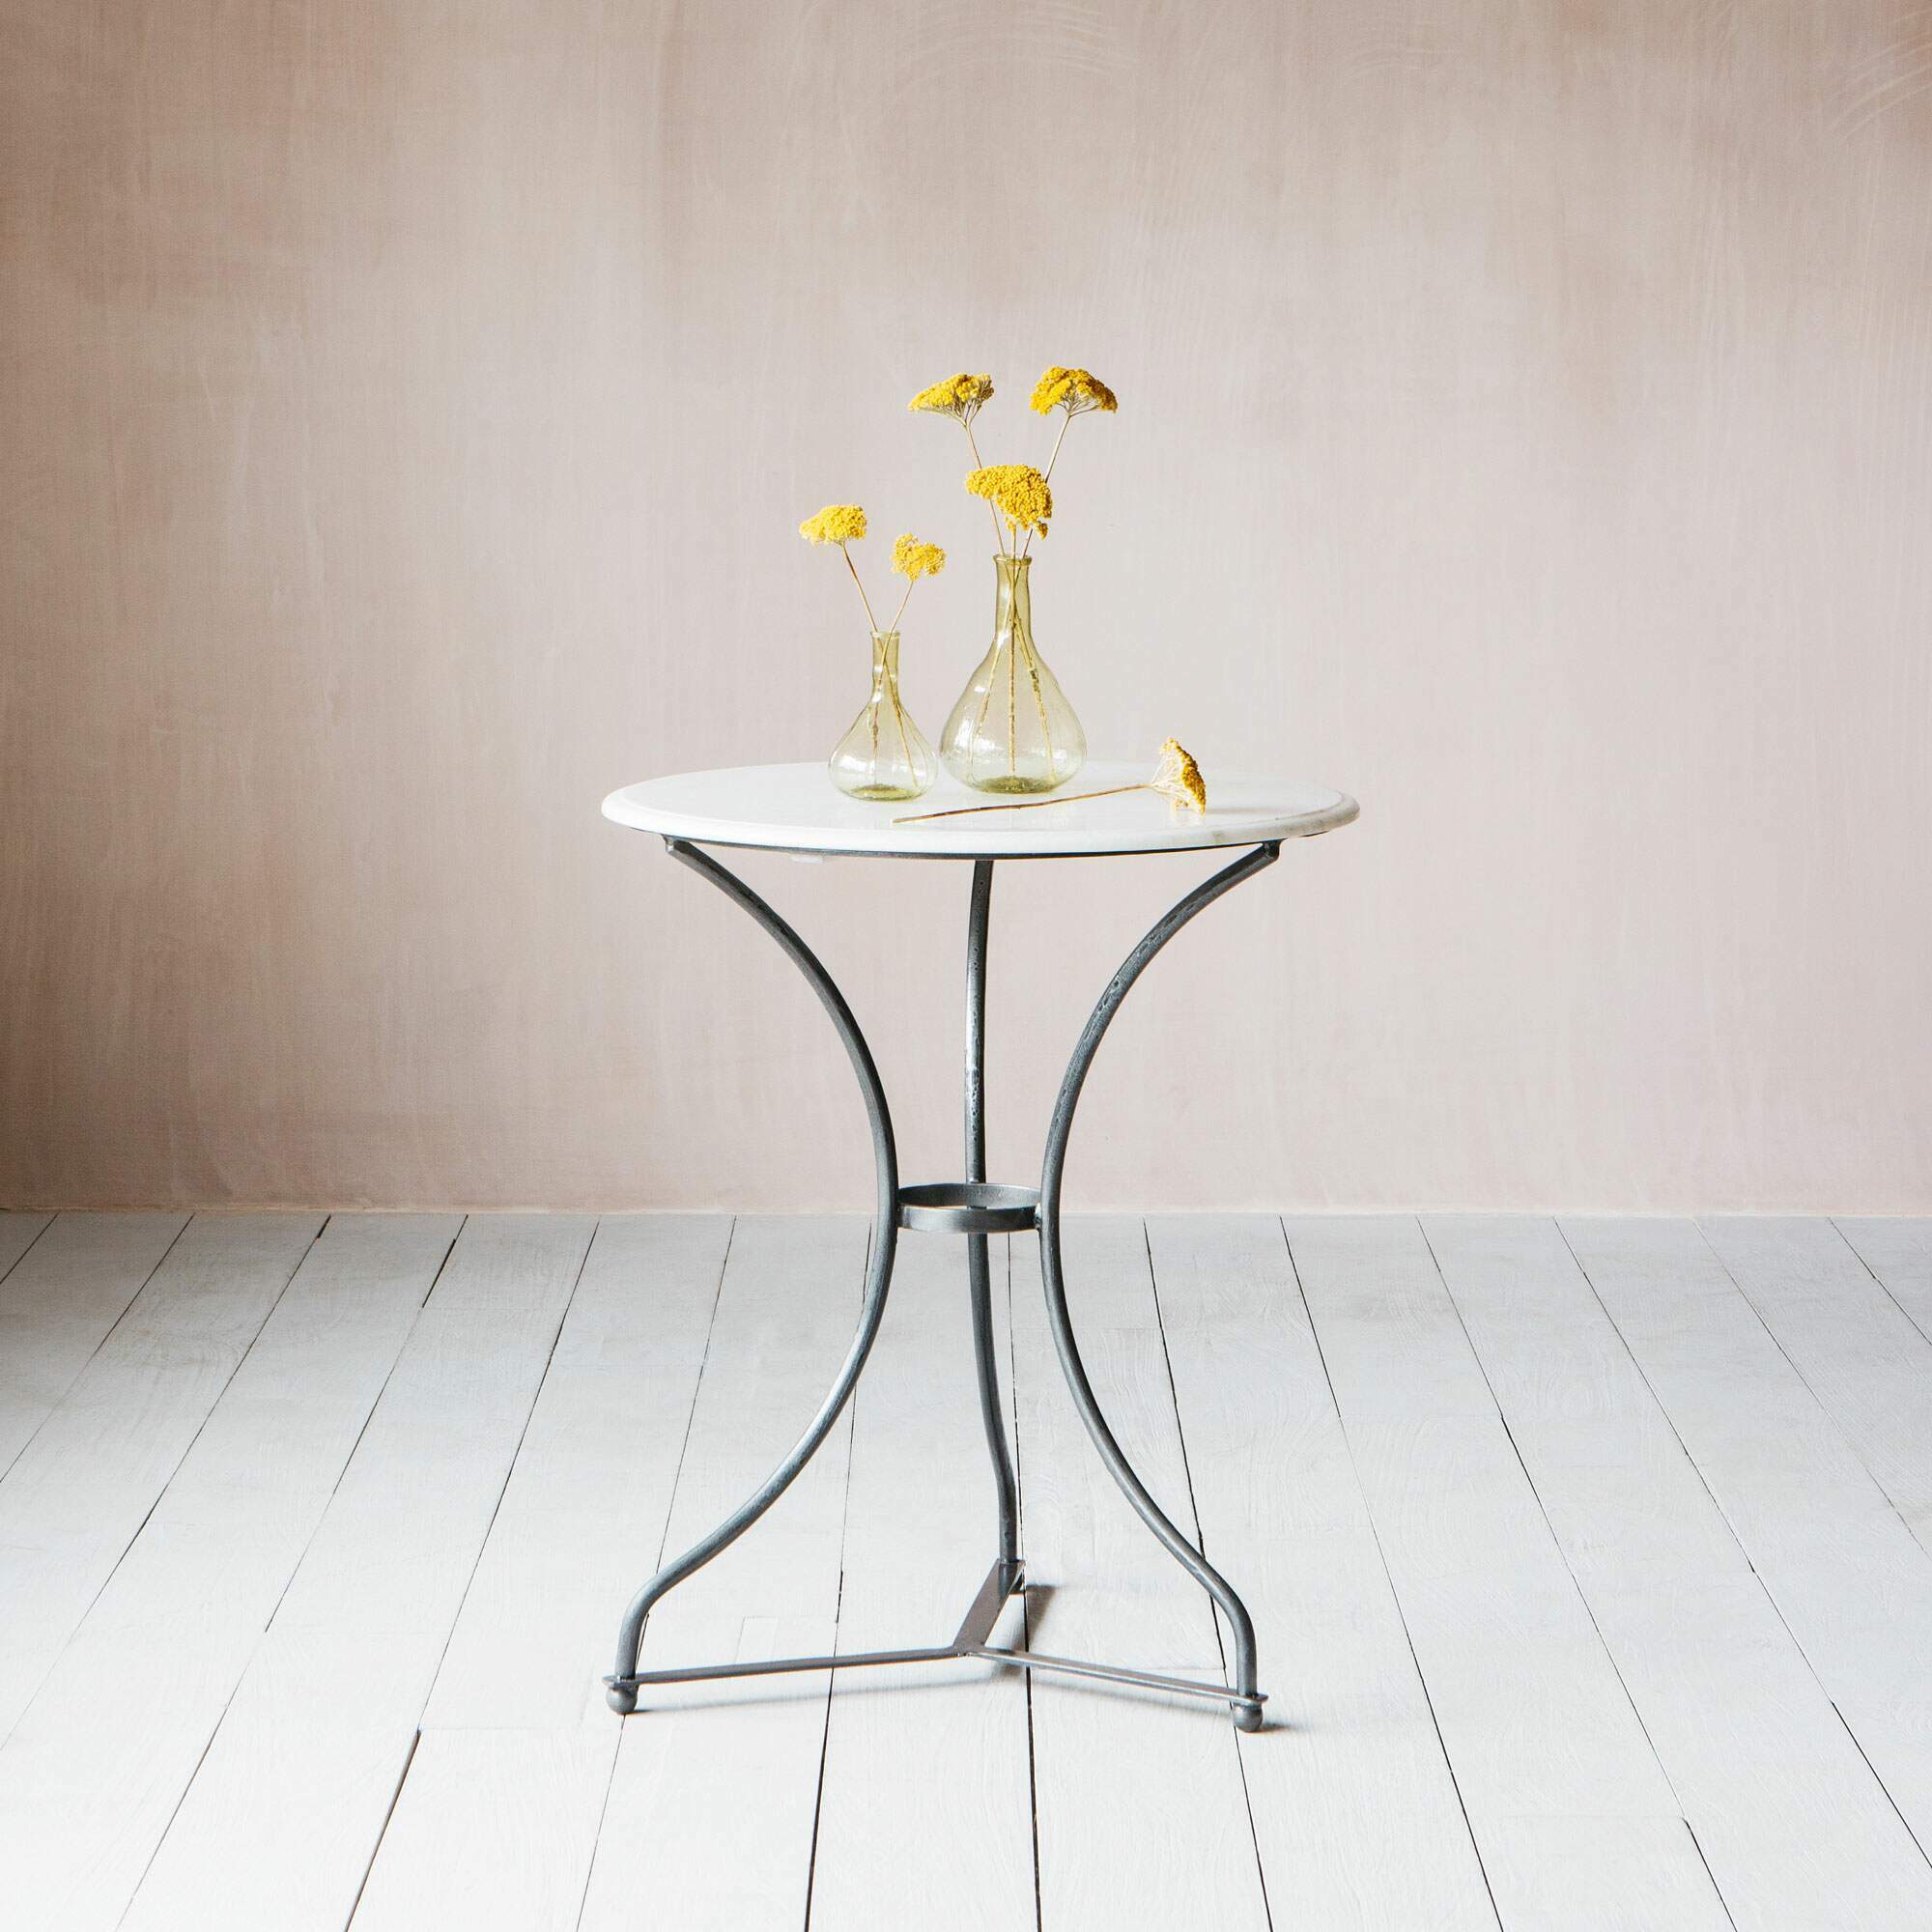 Read more about Graham and green barcelona marble side table